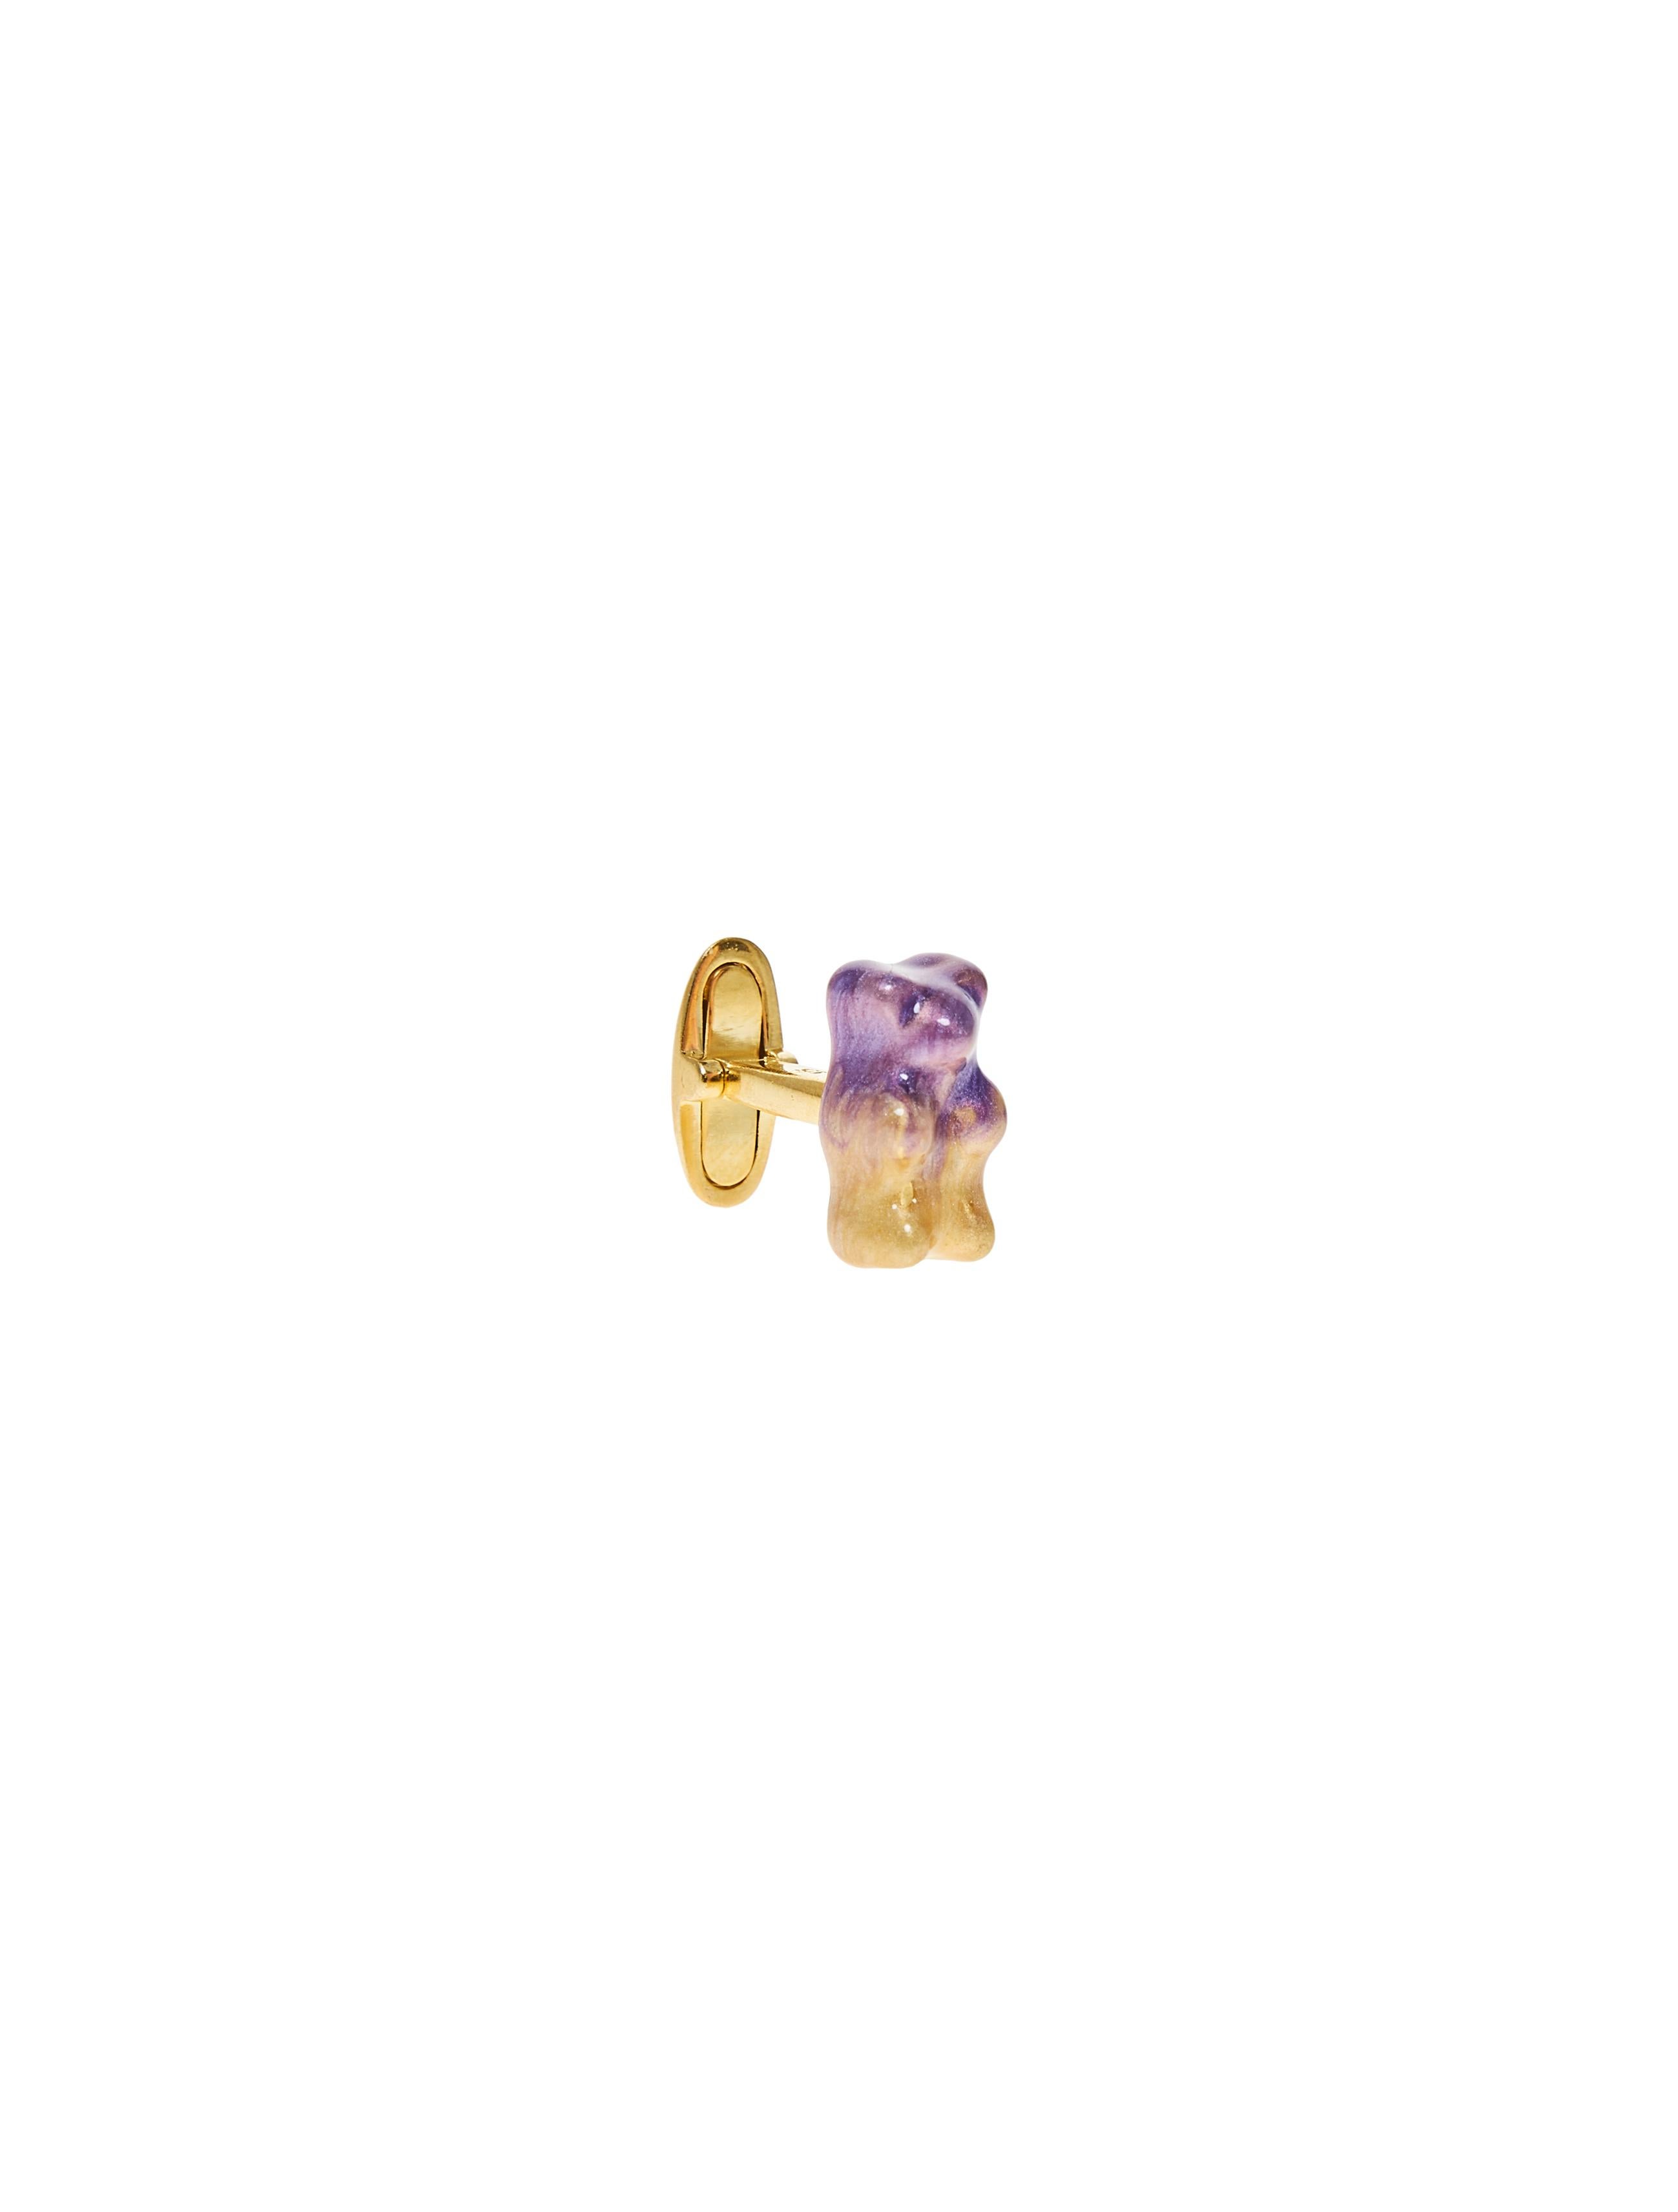 18K gold plated silver gummy bear cufflinks with transparent Red  enamel coverage. 

The Gummy Project by Maggoosh is a capsule collection inspired by the designer's life in New York City and her passion for breakdancing and other street arts.